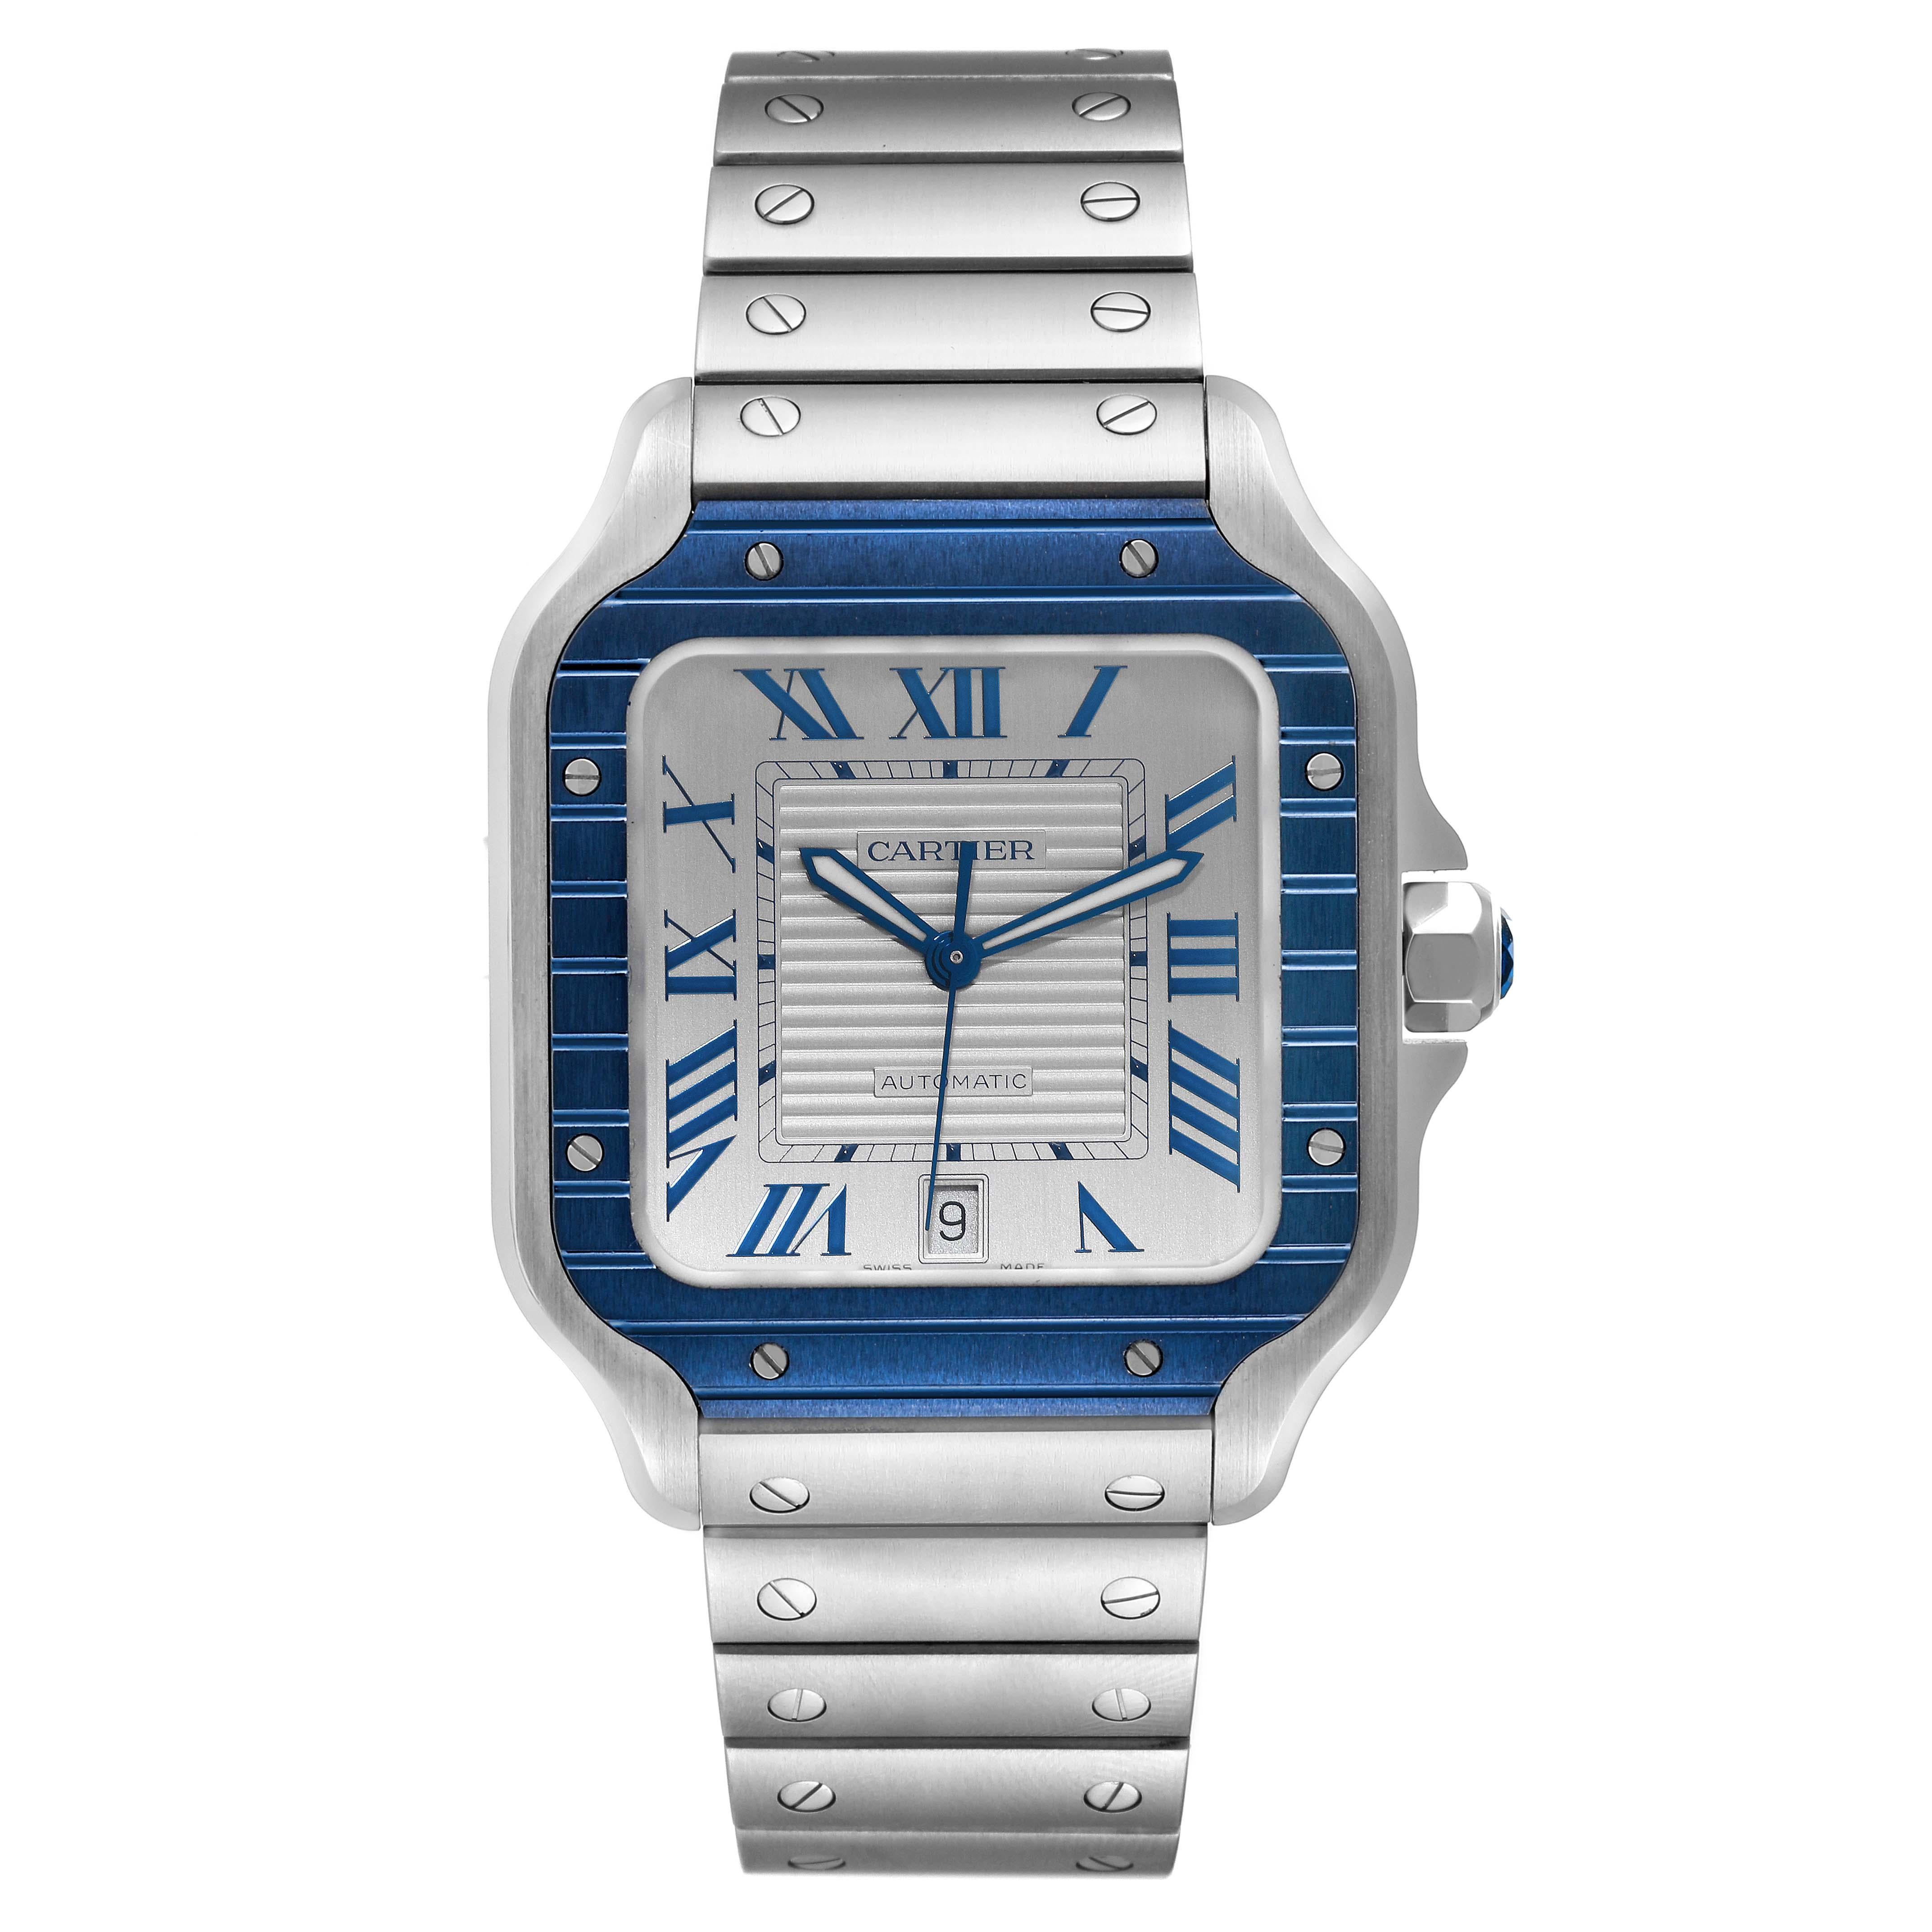 Cartier Santos Large Stainless Steel PVD Silver Dial Mens Watch WSSA0047 Unworn. Automatic self-winding movement. Stainless steel case 39.8 x 47.5 mm. Octagonal crown set with a faceted blue spinel. Blue PVD bezel punctuated with 8 signature screws.